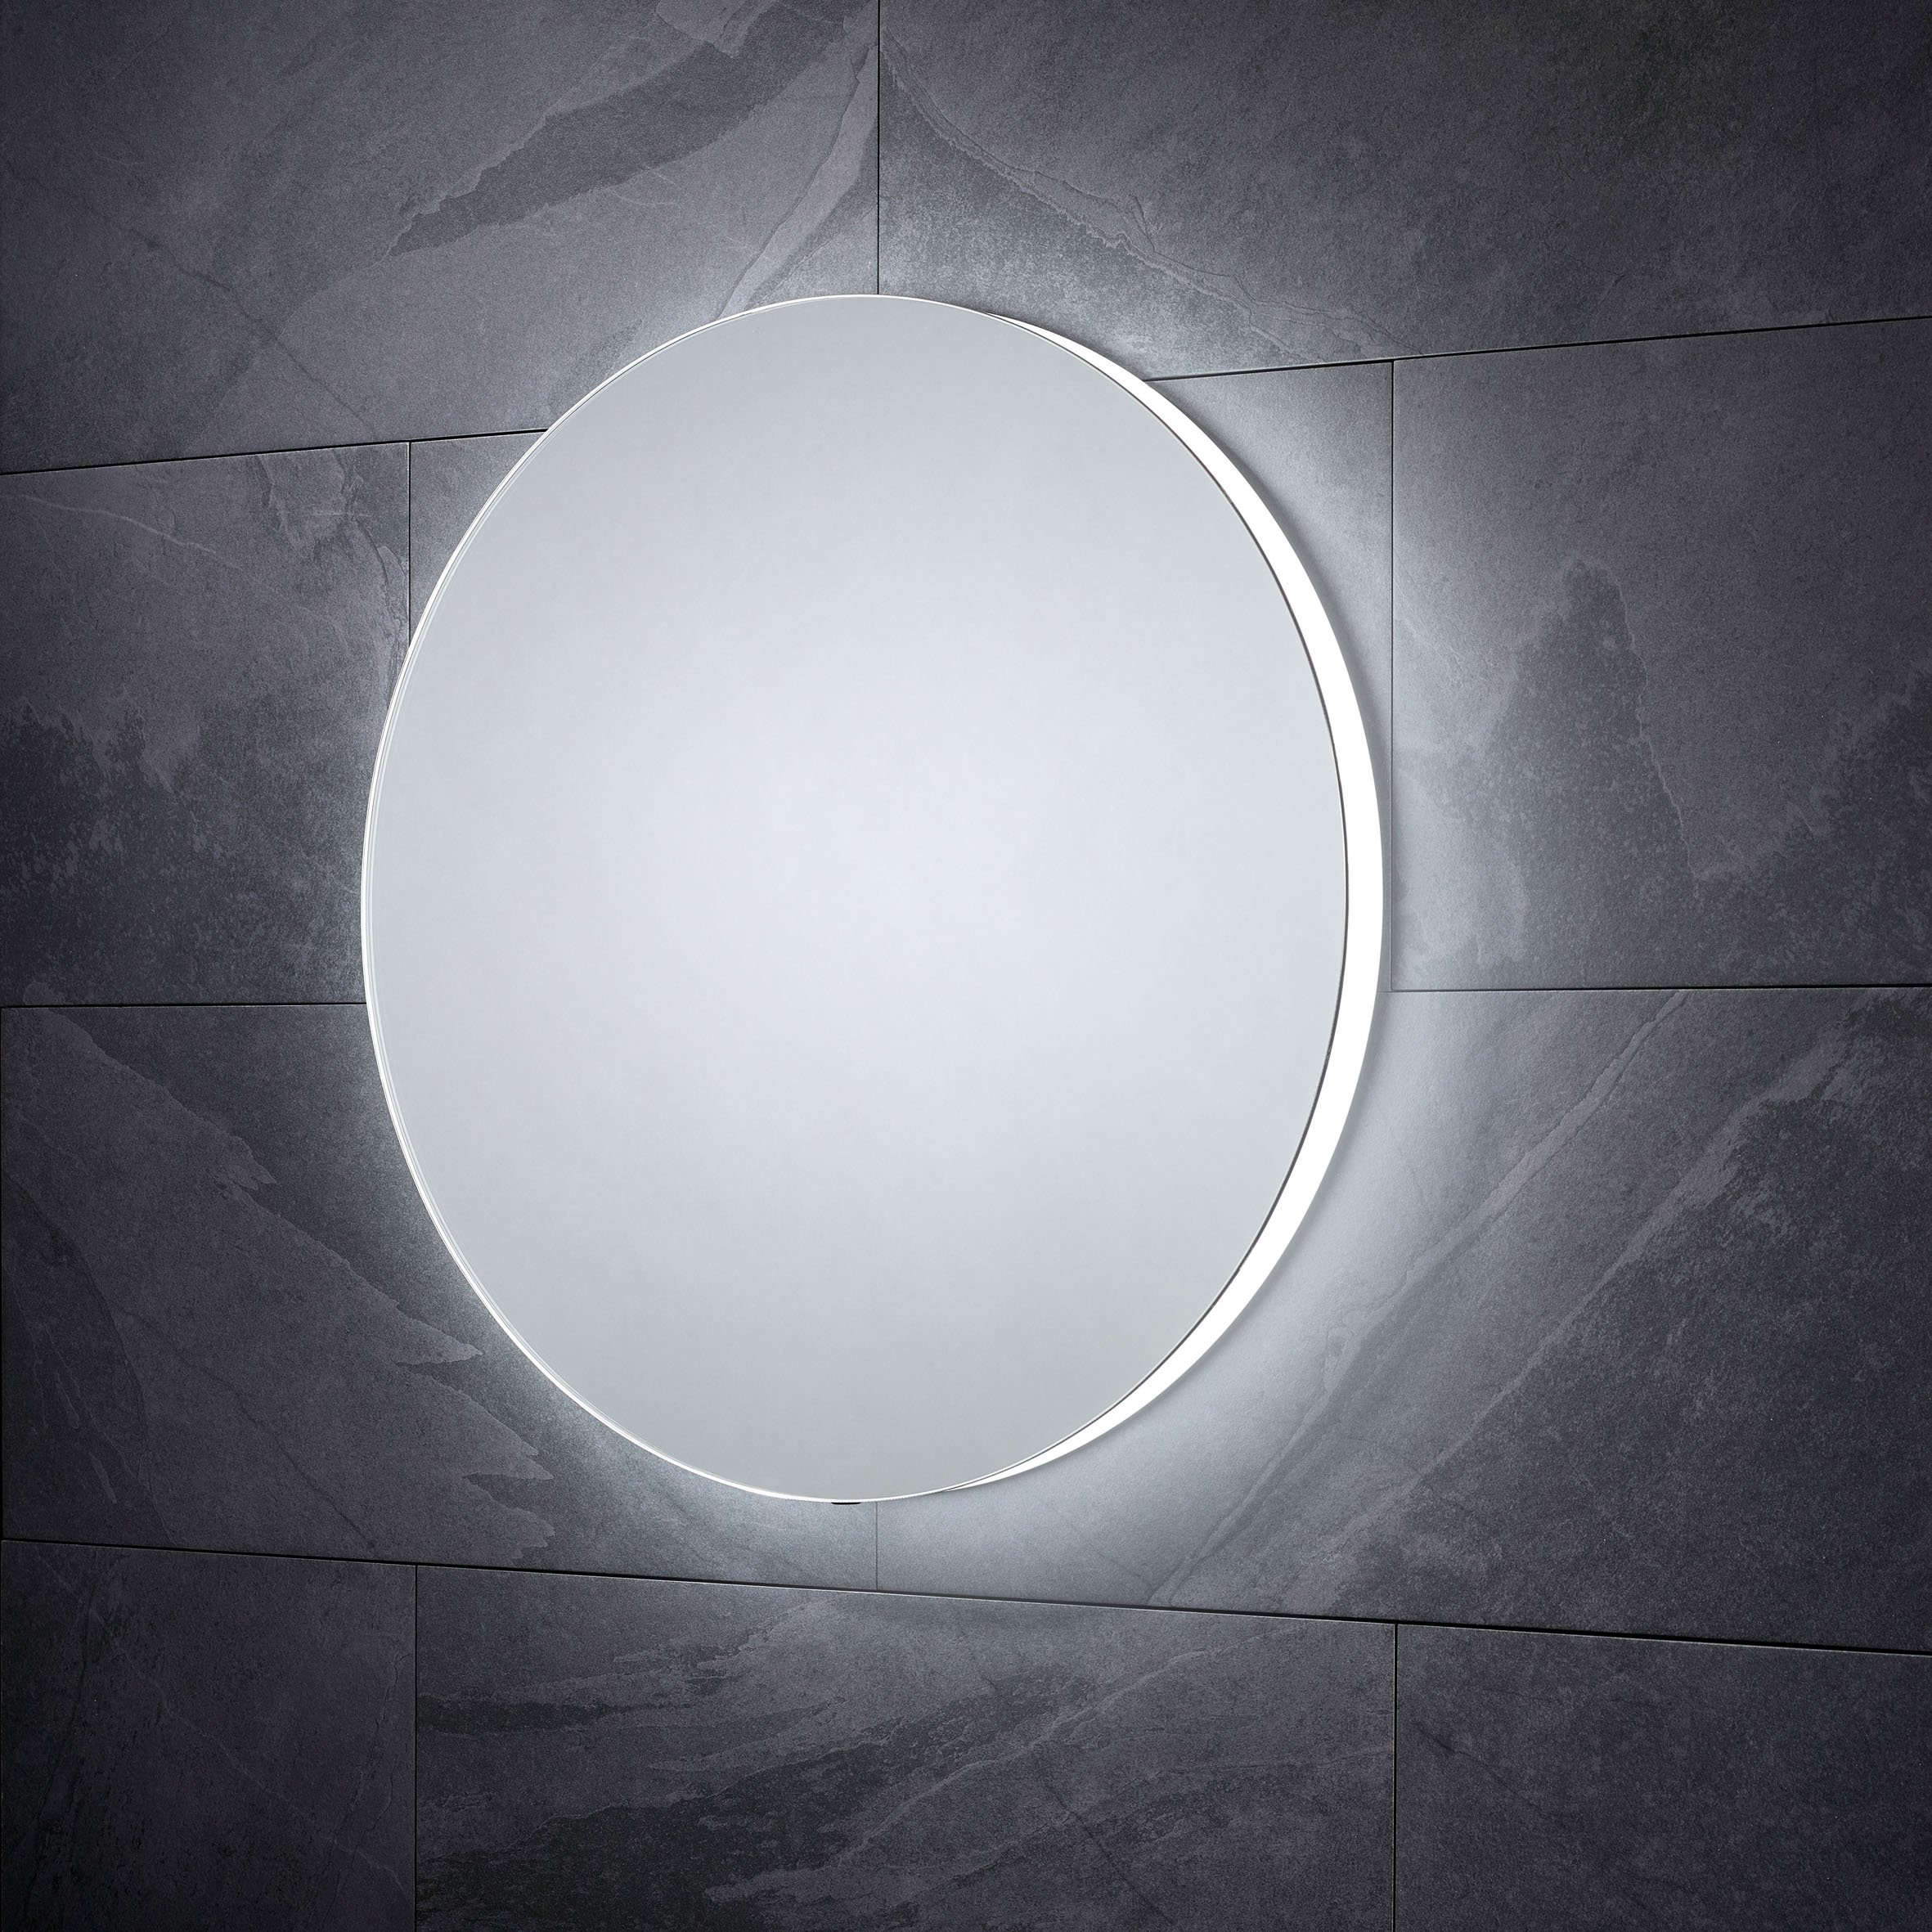 I Want to Install New Lighting in My Bathroom… Where Do I Start?